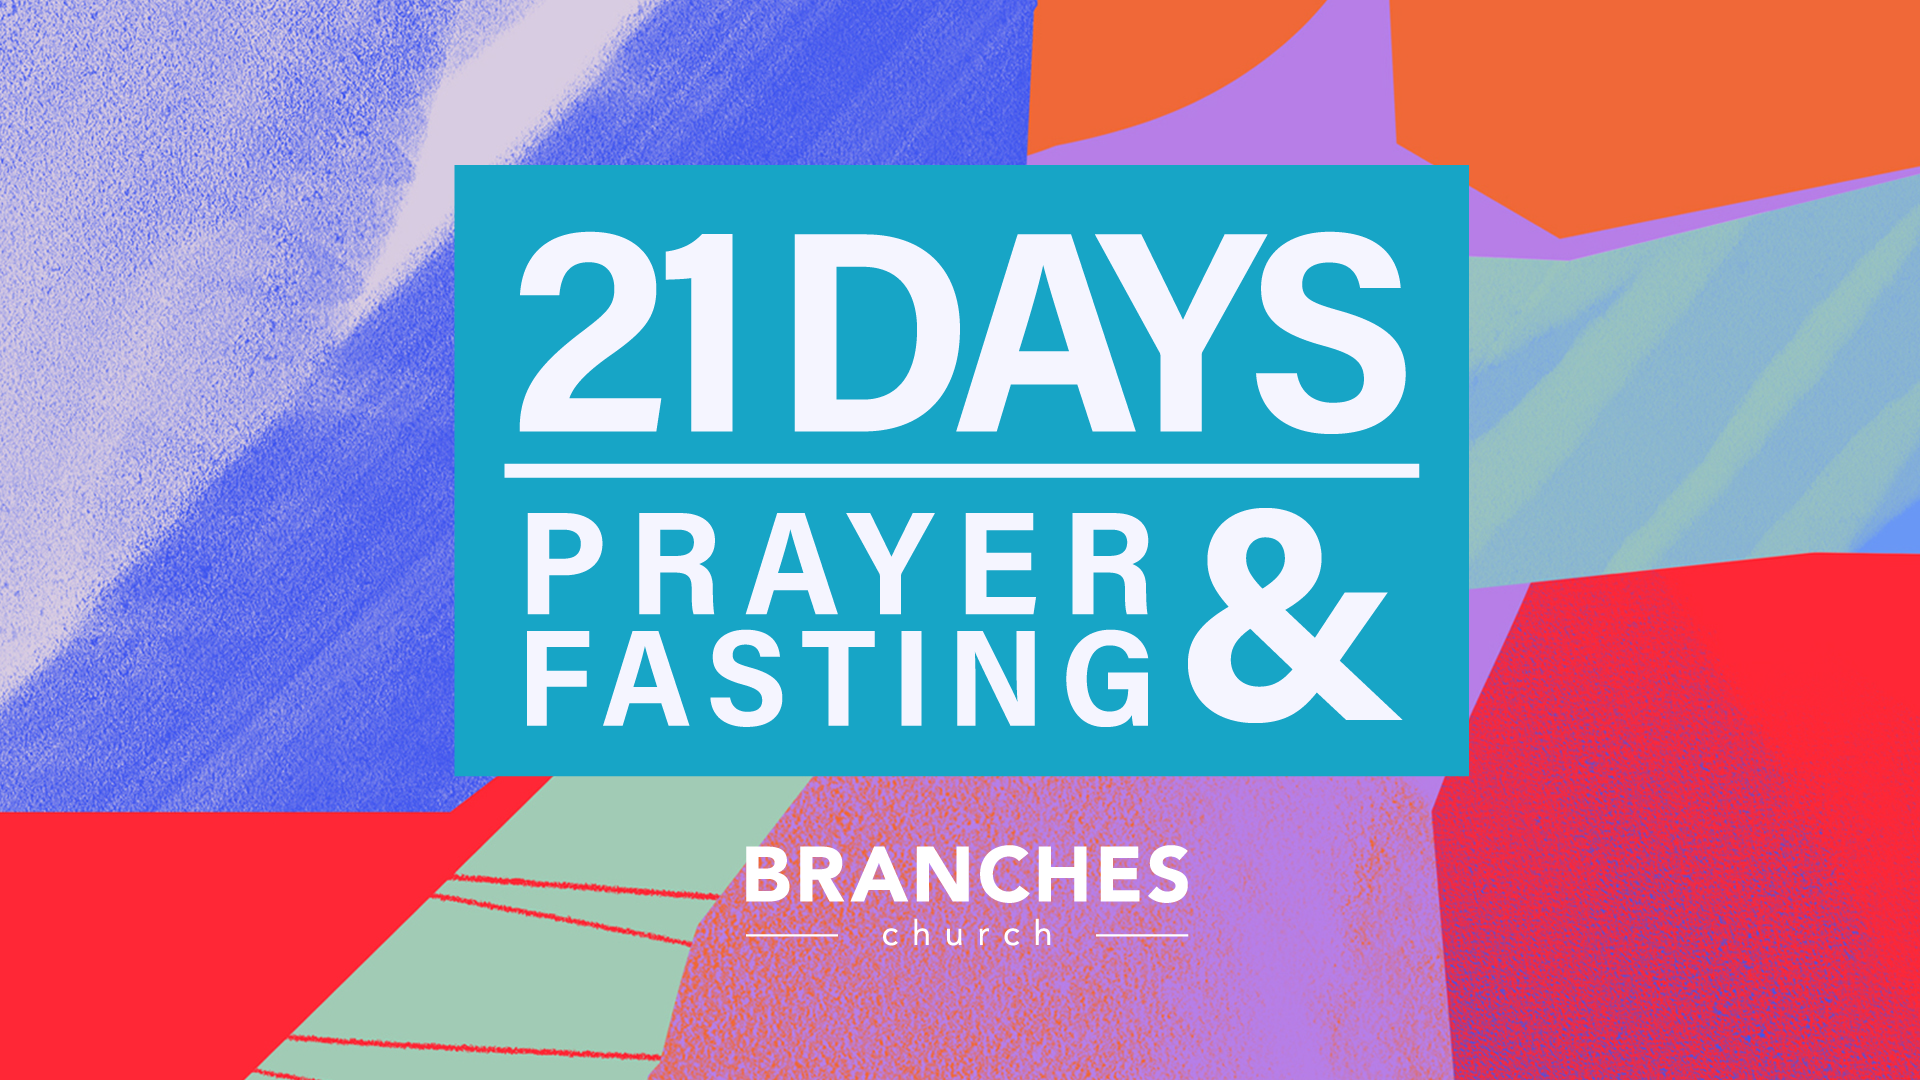 21 days of prayer and fasting with colorful background